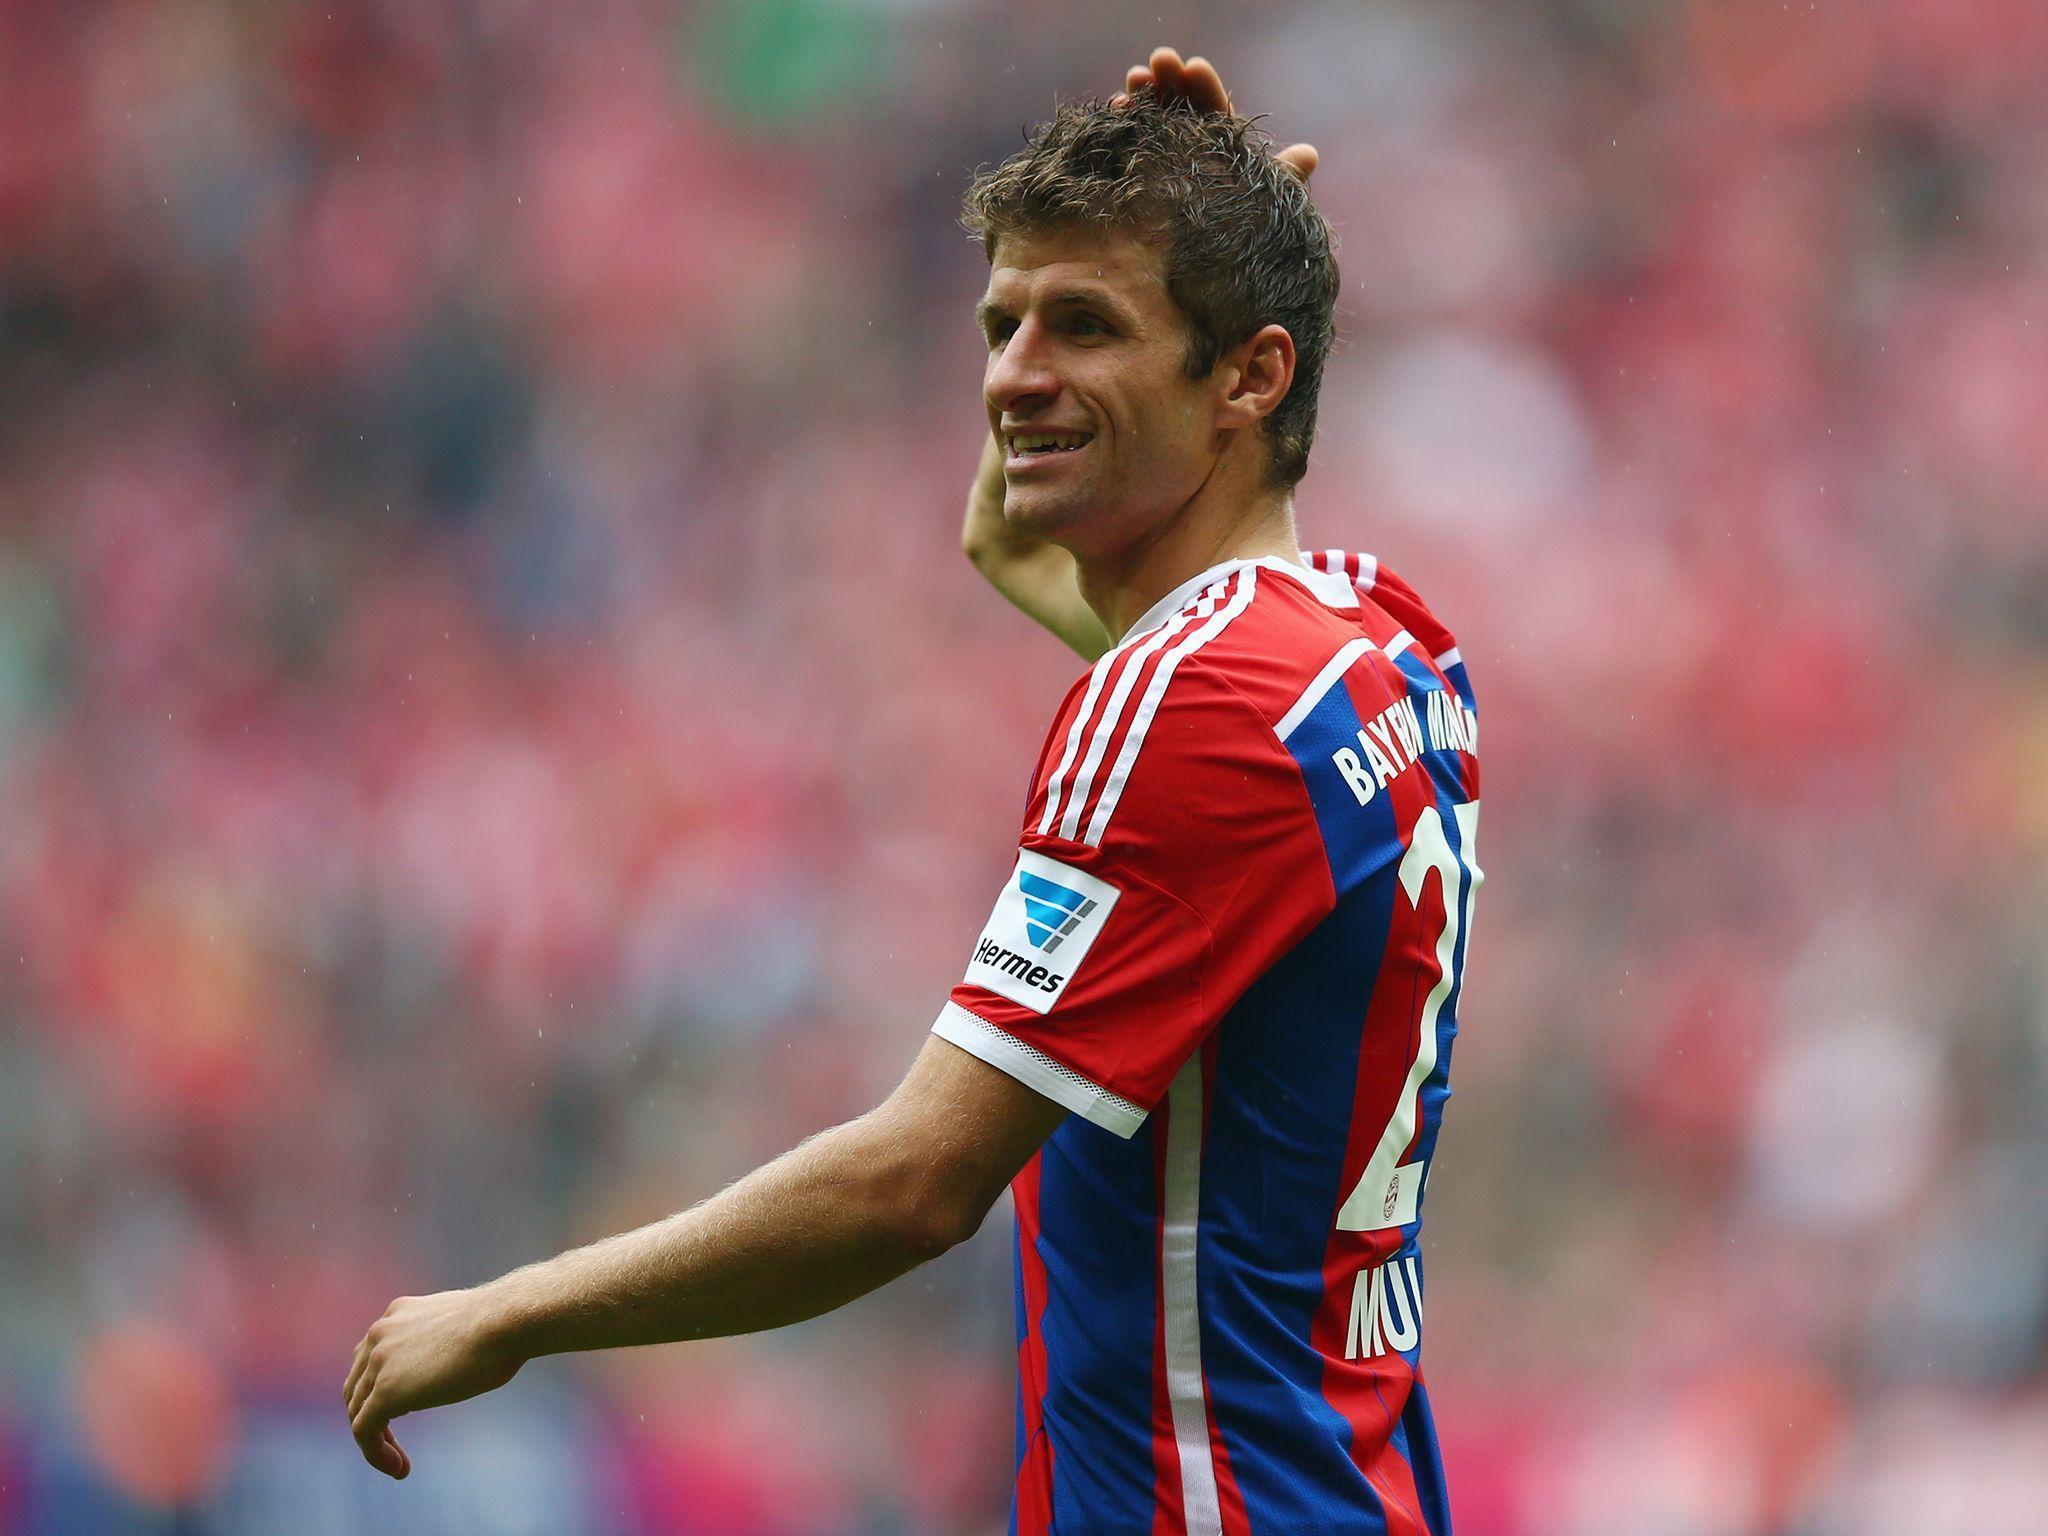 Thomas Muller Wallpaper High Resolution and Quality Download